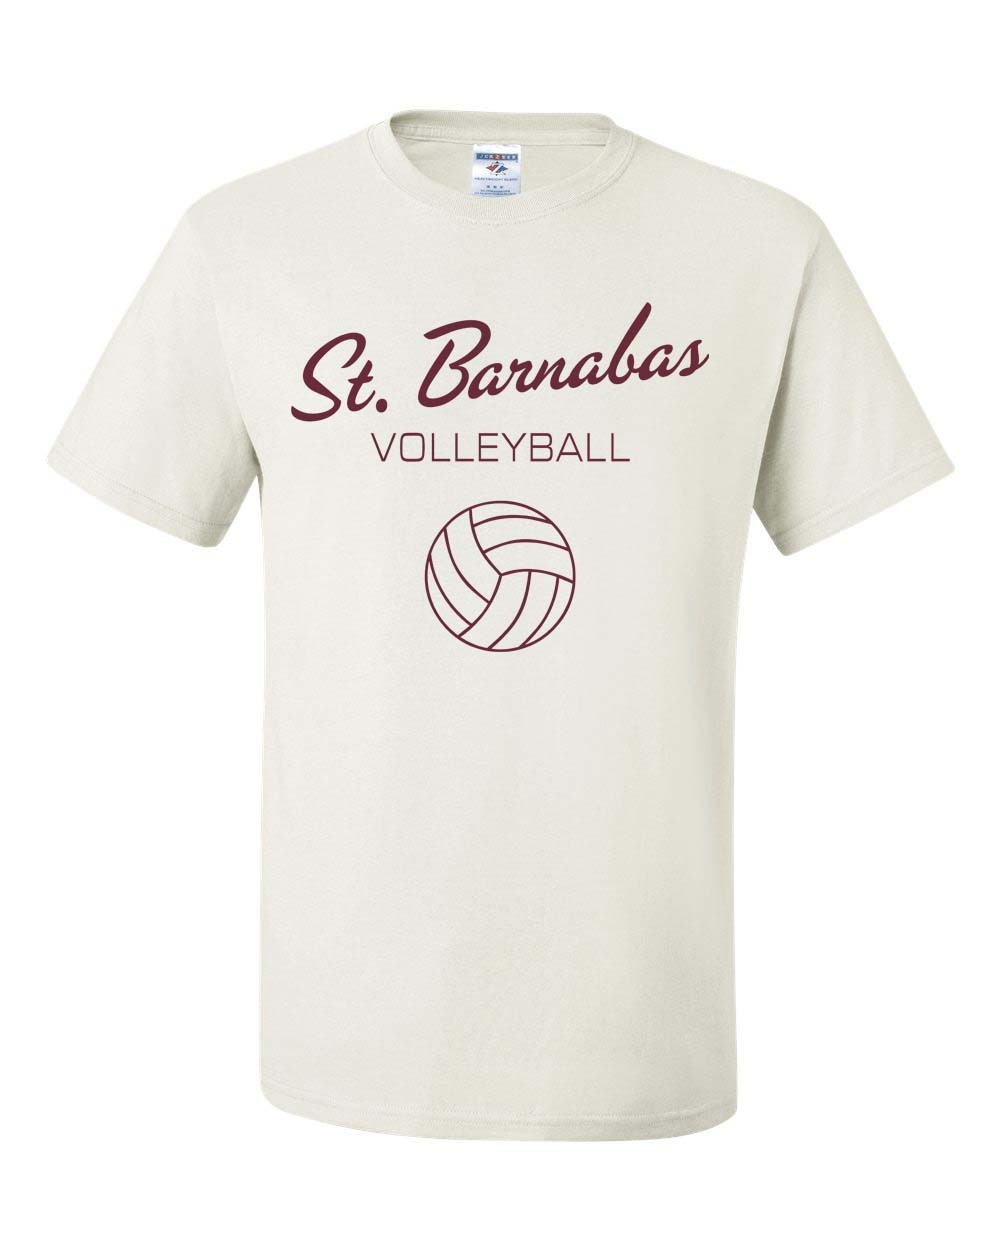 SBS Volleyball Team S/S T-Shirt w/ Logo - Please Allow 2-3 Weeks For Delivery 